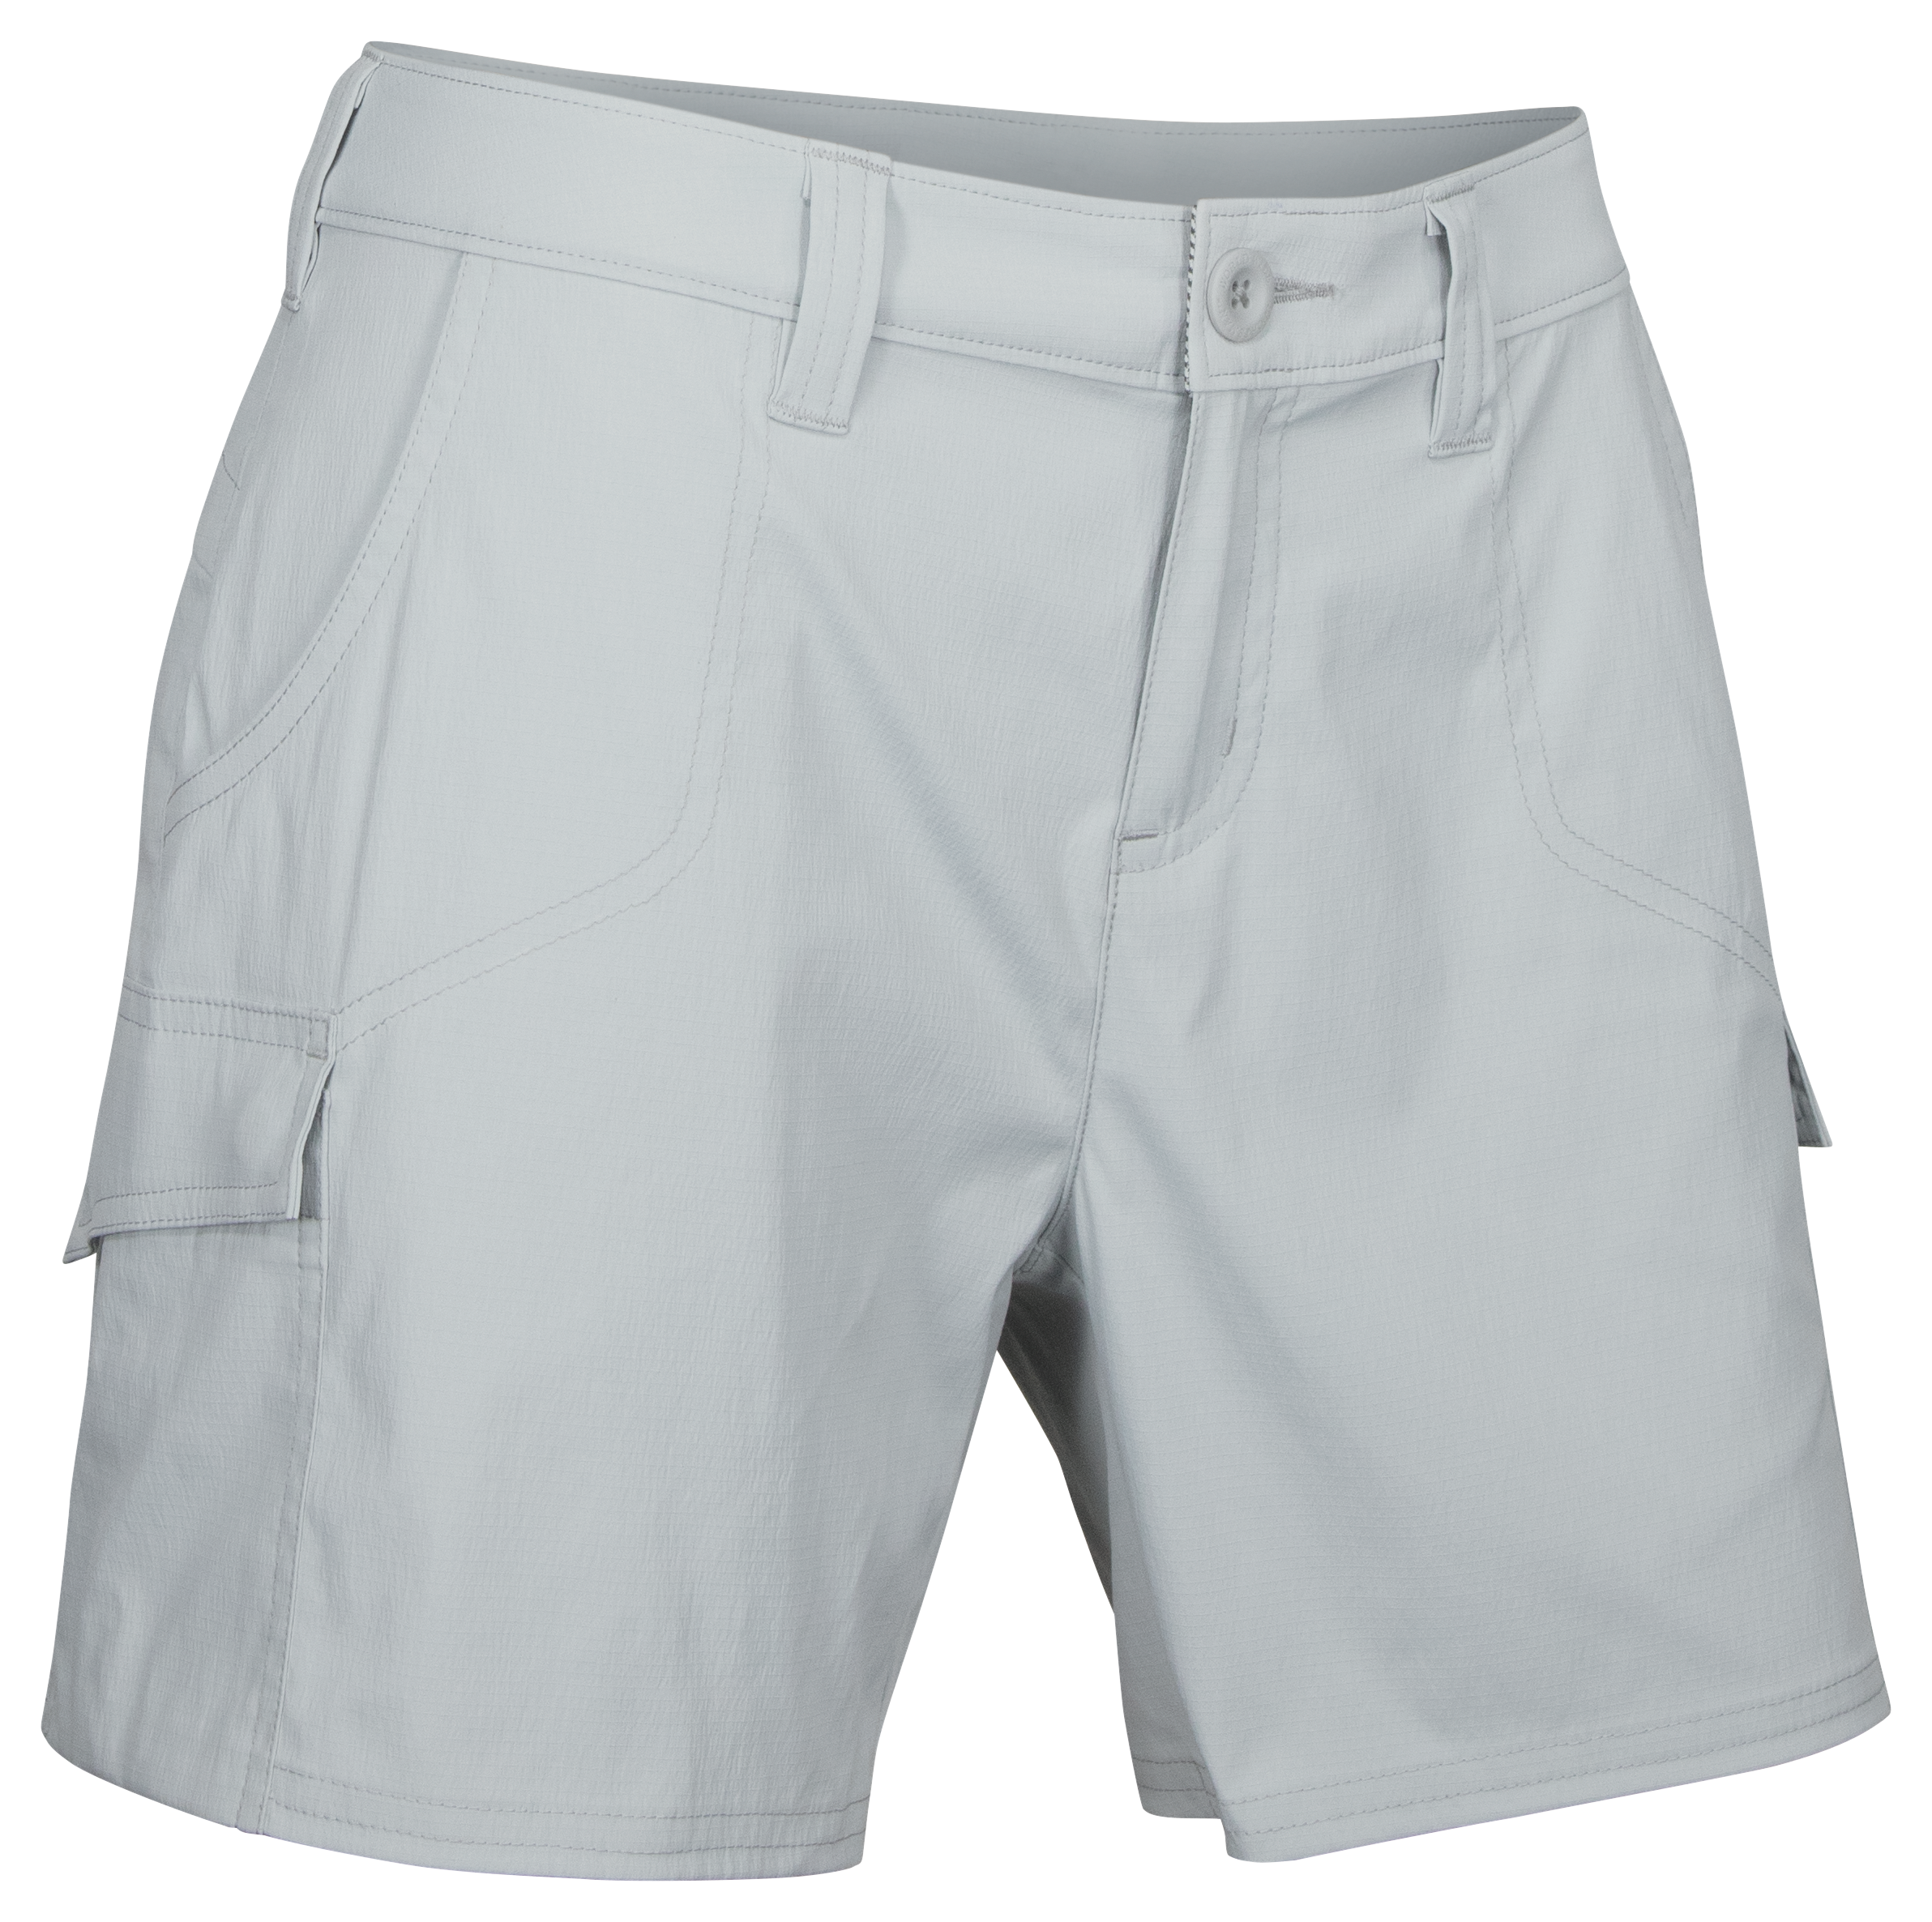 World Wide Sportsman Ripstop Cargo Shorts for Ladies - High Rise-20 - 20W